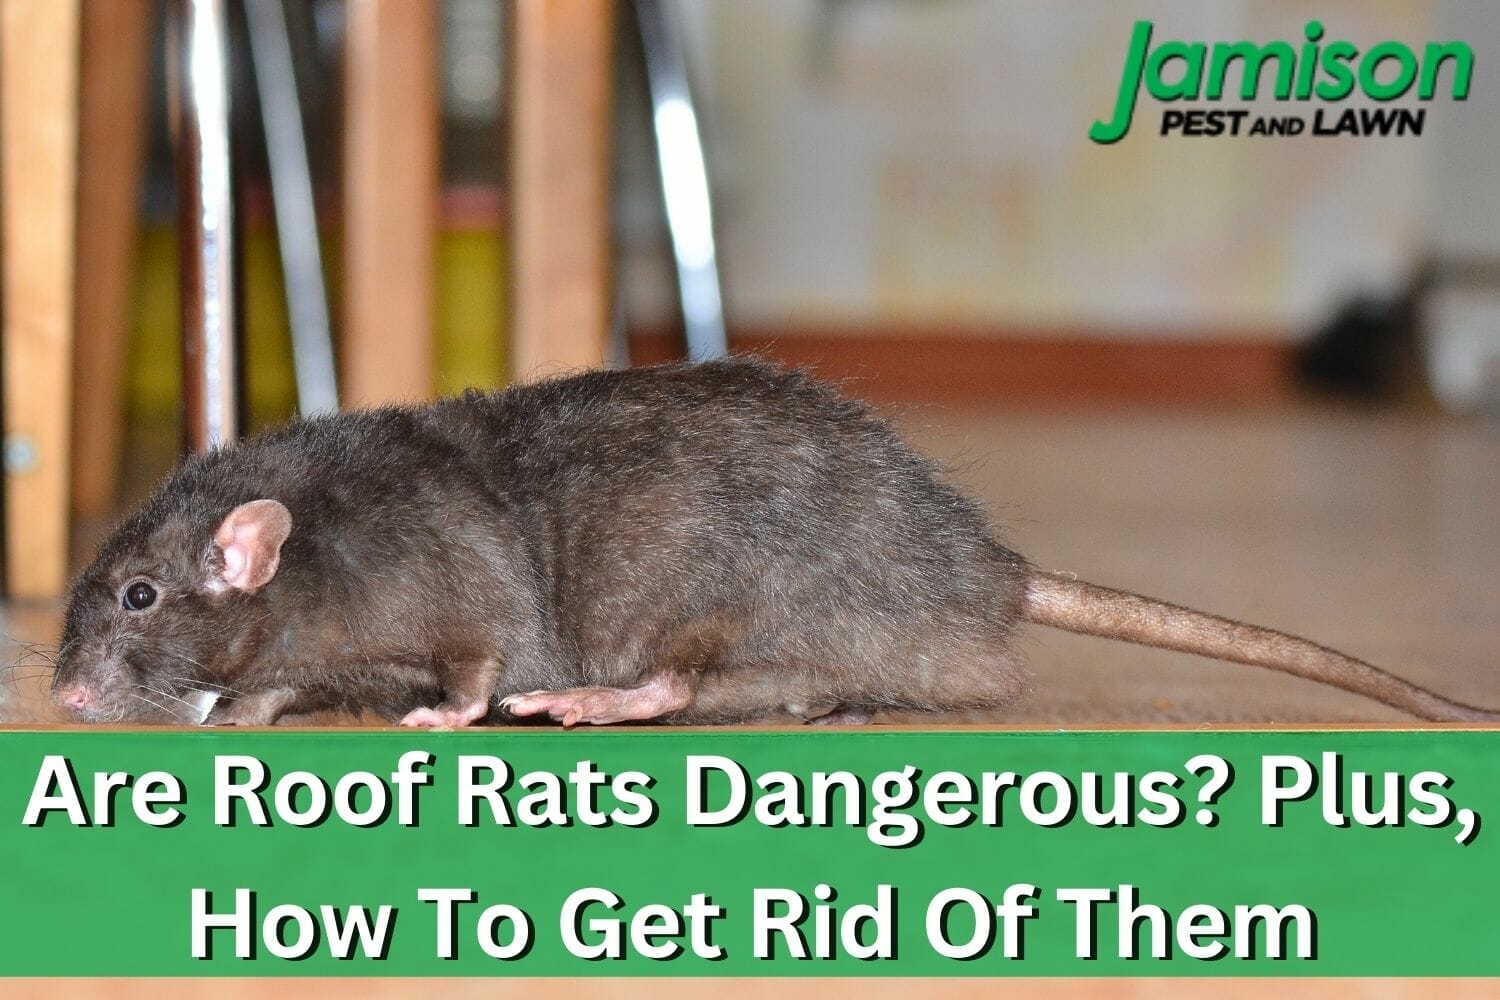 Are Roof Rats Dangerous? Plus, How To Get Rid Of Them